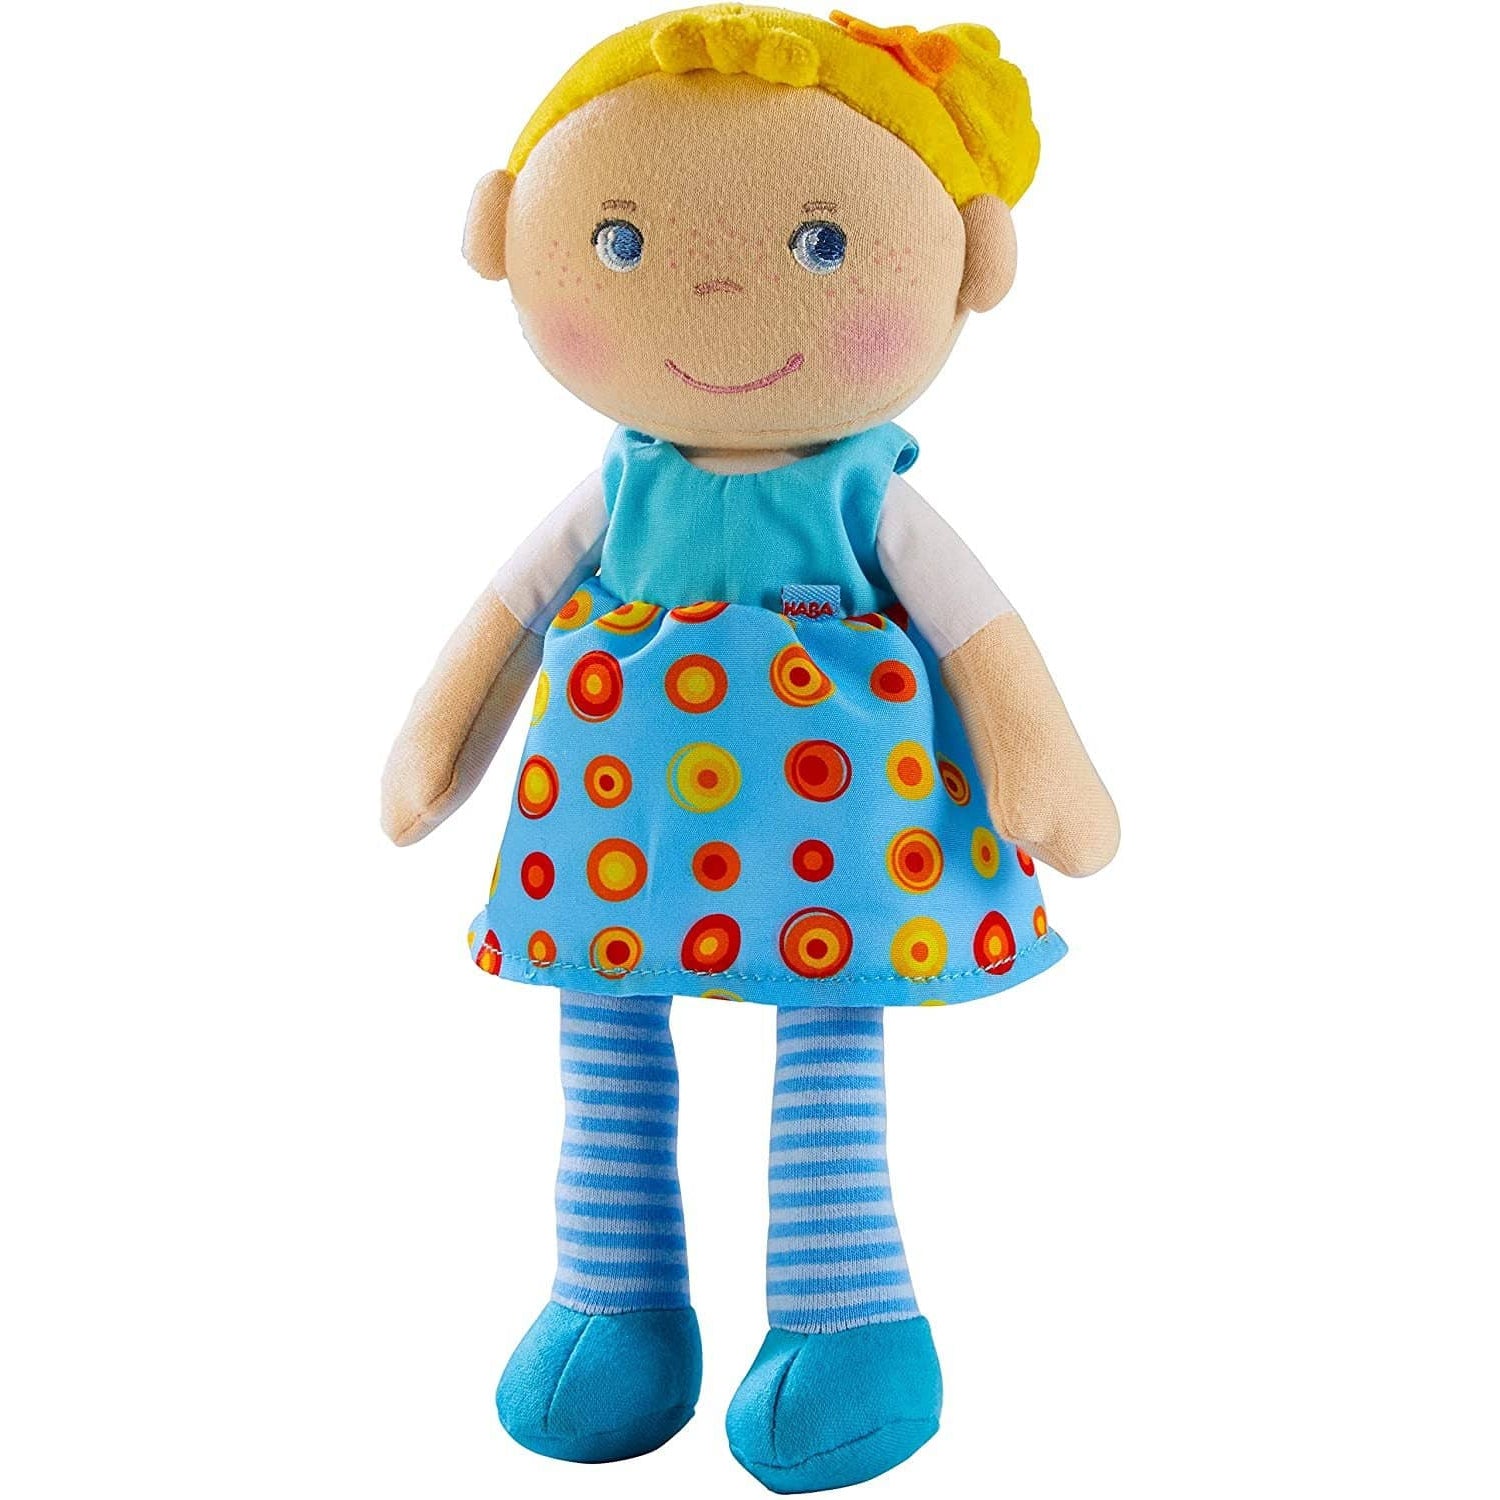 Snug Up Edda - 10" Soft Doll With Fuzzy Blonde Hair, Embroidered Face And Removable Blue Dress (Machine Washable) For Ages 18 Months +-Kidding Around NYC